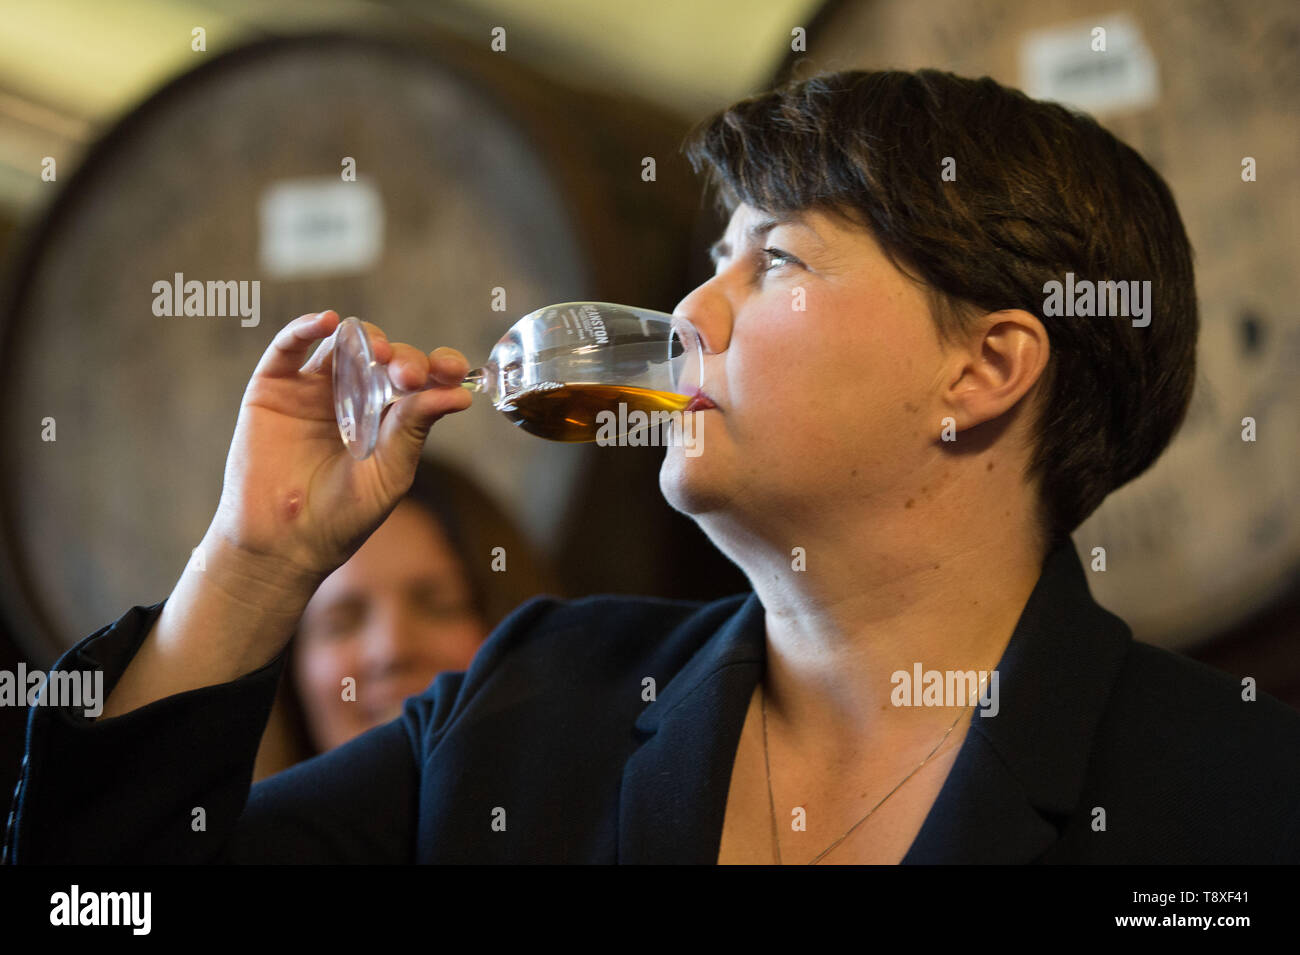 Doune, Stirlingshire, UK. 15 May 2019. Ruth Davidson MSP, leader of the Scottish Conservatives & Unionist Party, visits Deanston Distillery in Dounde with her MEP candidates for the up and coming European Elections. Credit: Colin Fisher/Alamy Live News. Stock Photo